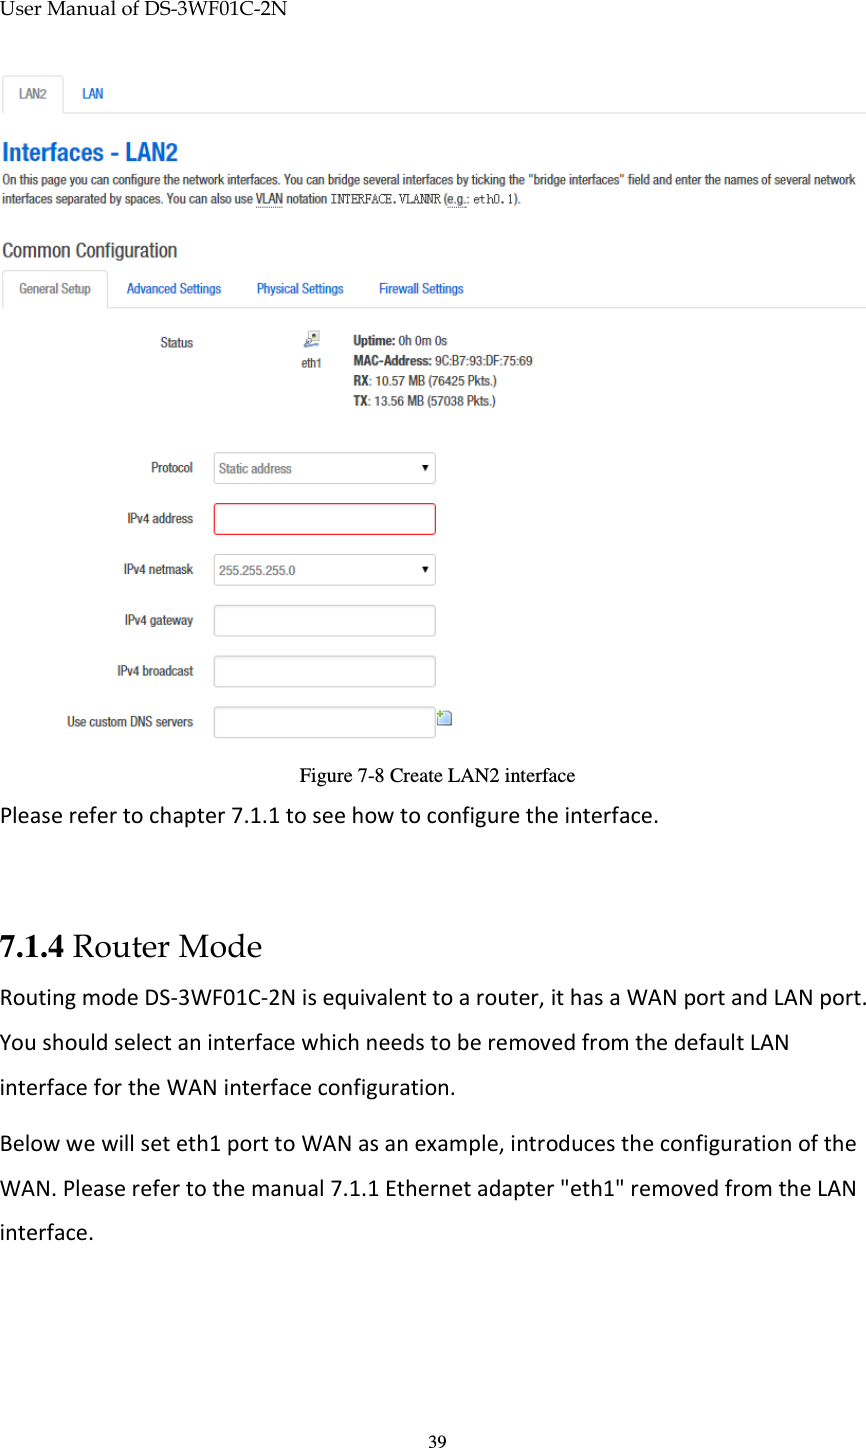 User Manual of DS-3WF01C-2N   39 Figure 7-8 Create LAN2 interface Please refer to chapter 7.1.1 to see how to configure the interface.  7.1.4 Router Mode Routing mode DS-3WF01C-2N is equivalent to a router, it has a WAN port and LAN port. You should select an interface which needs to be removed from the default LAN interface for the WAN interface configuration. Below we will set eth1 port to WAN as an example, introduces the configuration of the WAN. Please refer to the manual 7.1.1 Ethernet adapter &quot;eth1&quot; removed from the LAN interface. 